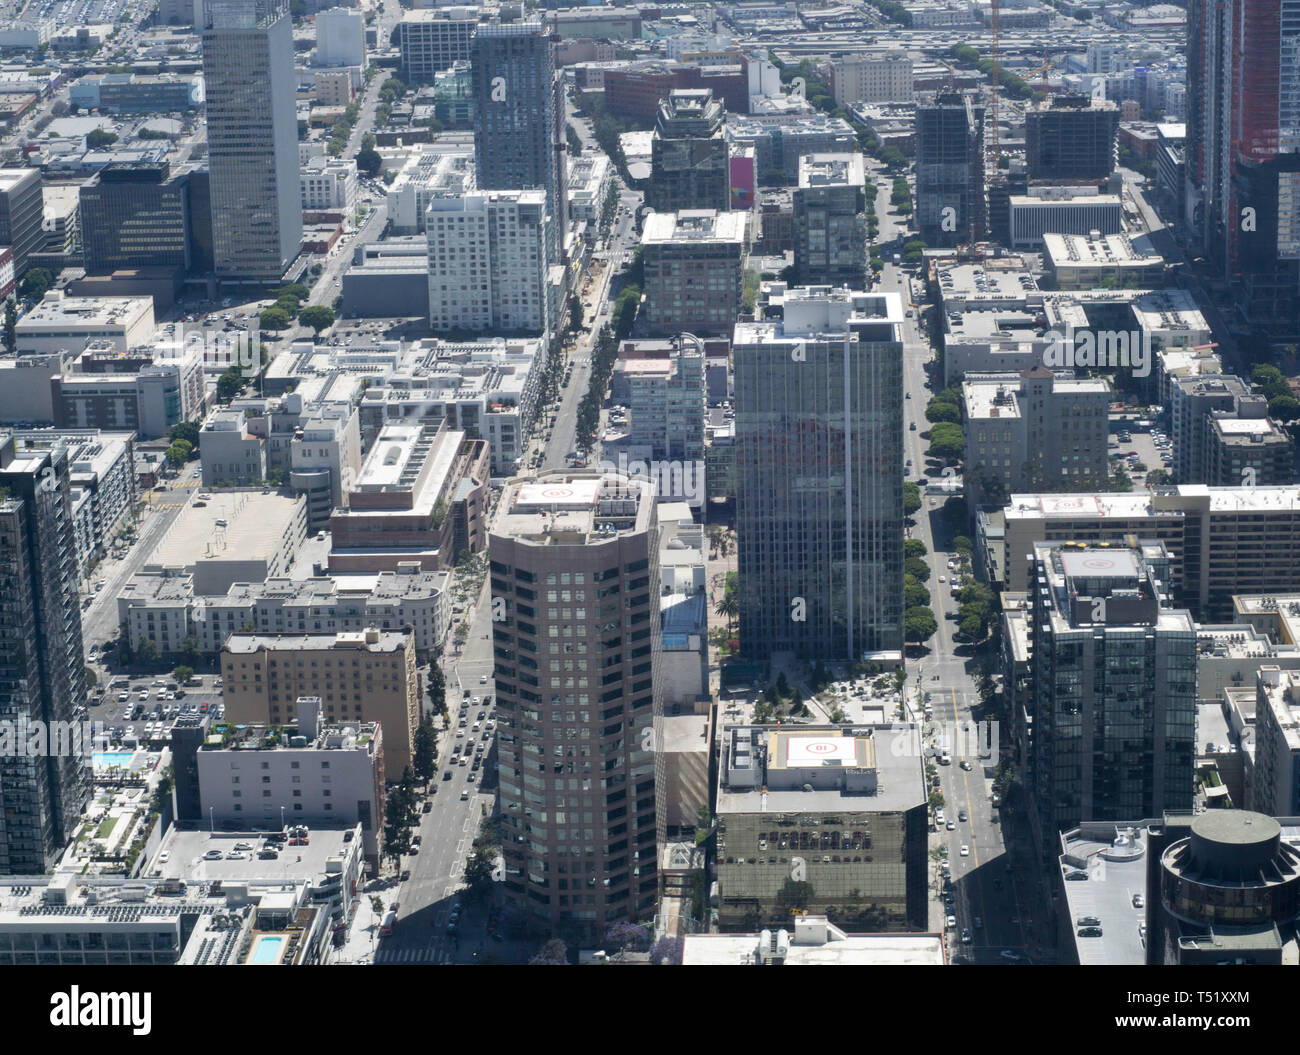 Wide angle view of downtown Los Angles during the day Stock Photo